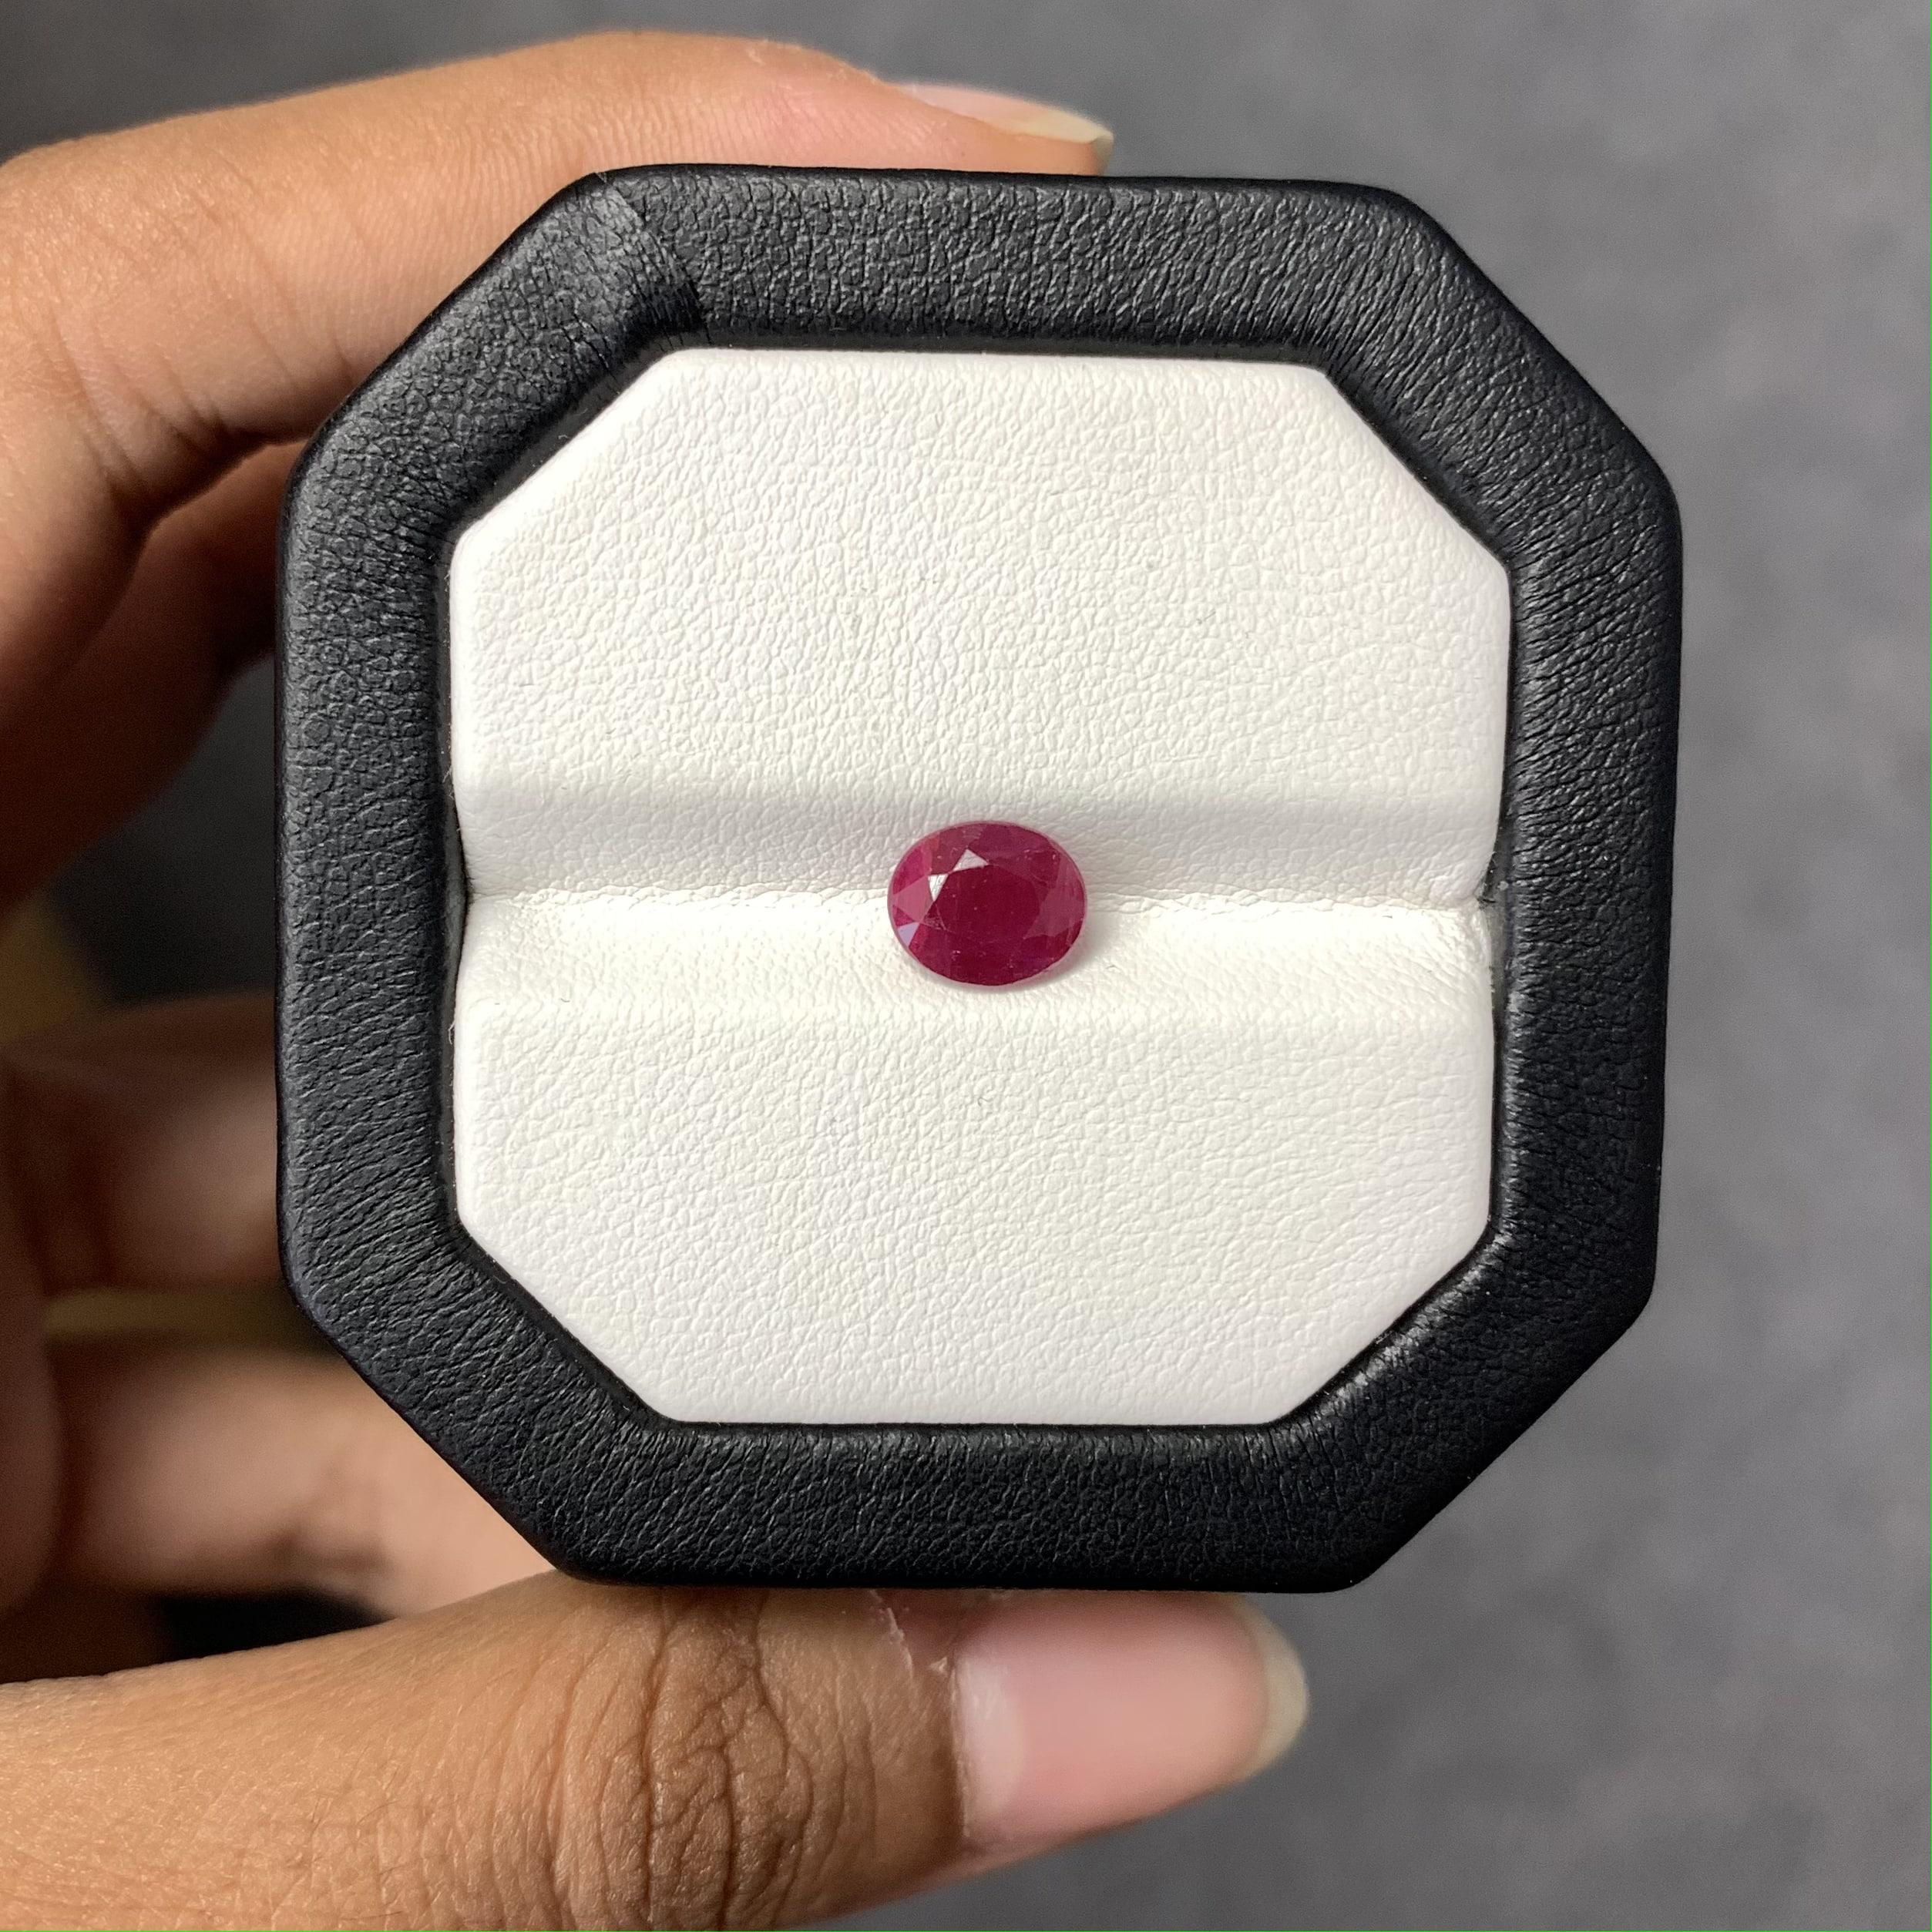 No-Heat 1.78 Carat Oval Cut Natural Ruby Pigeon Blood For Sale 2